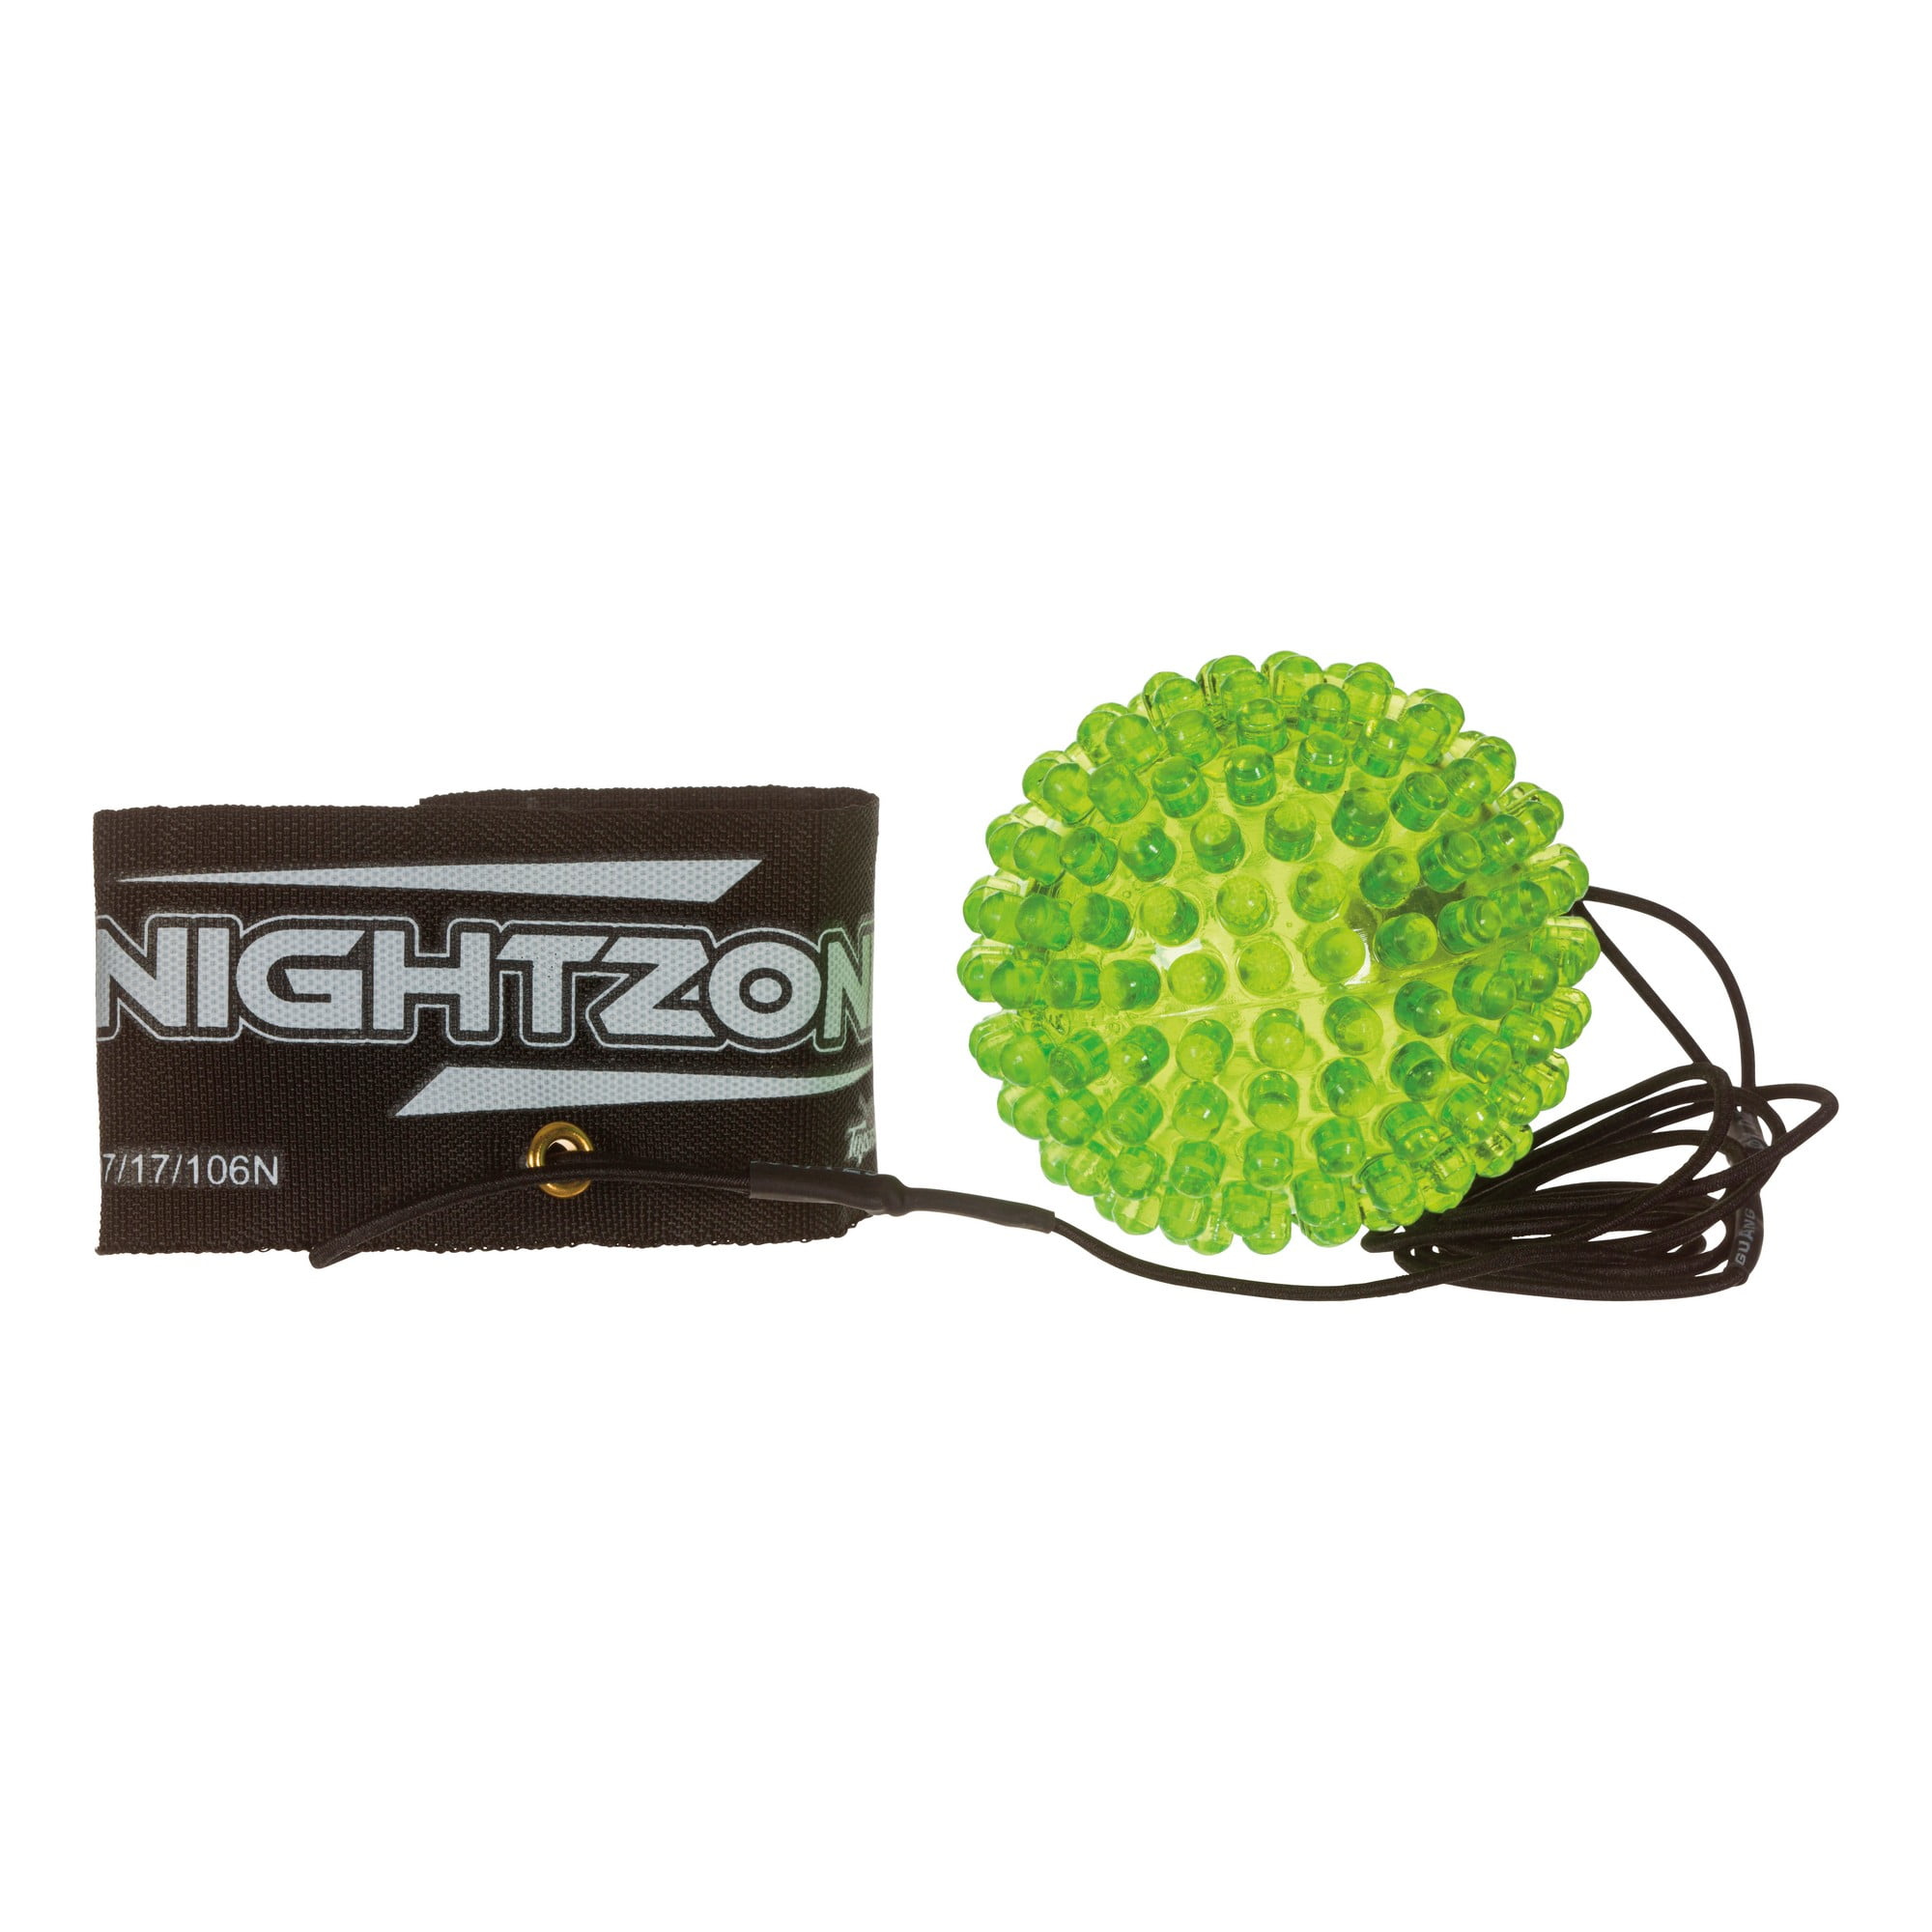 NightZone Ball with Light-up Band ~ 12 1/2 Inch Basketball Toy ~ Random 3 Colors 